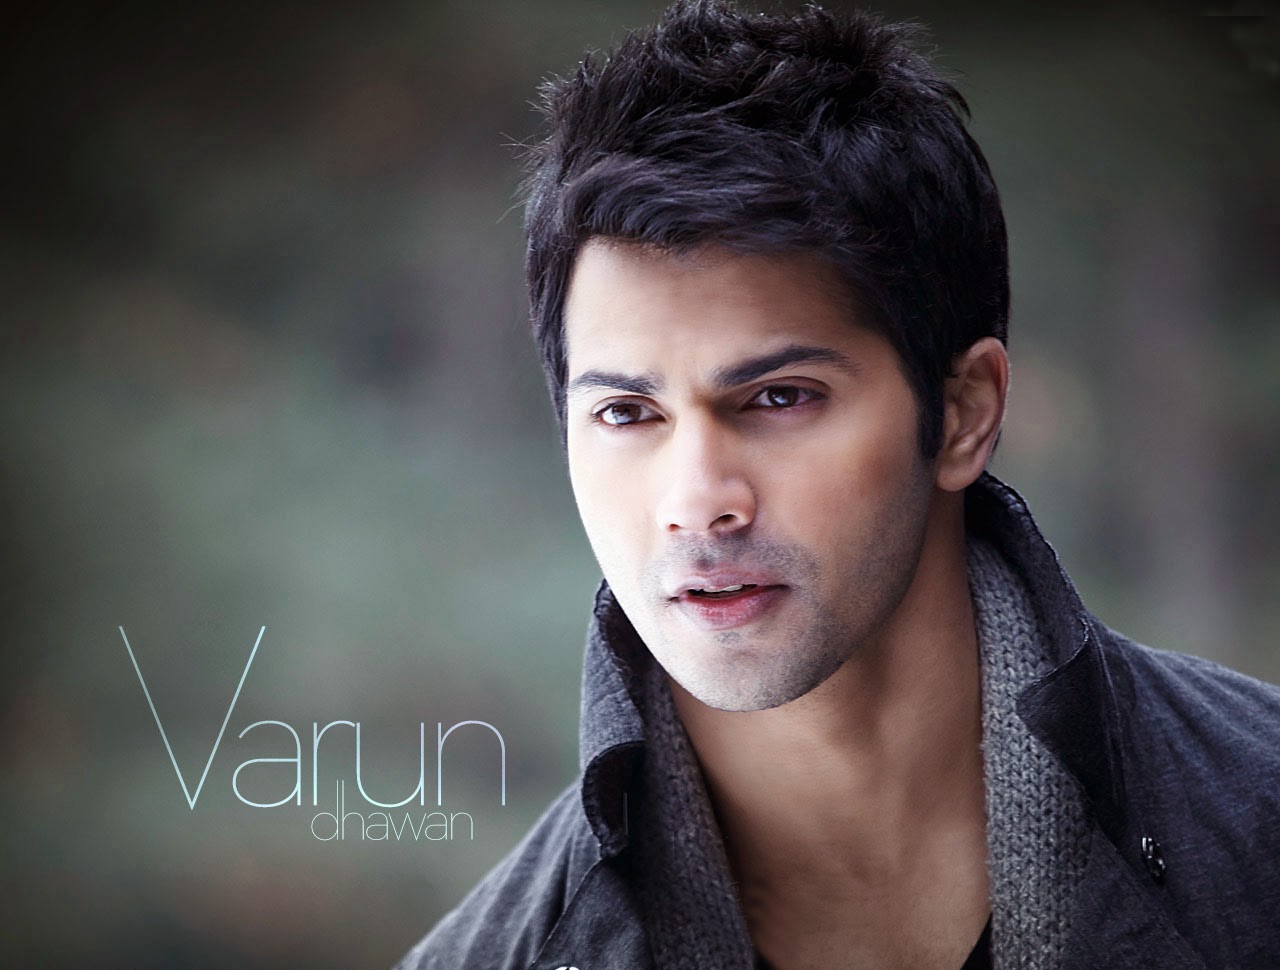 Wellcome To Bollywood Hd Wallpapers Varun Dhawan Bollywood Actors Full Hd Wallpapers